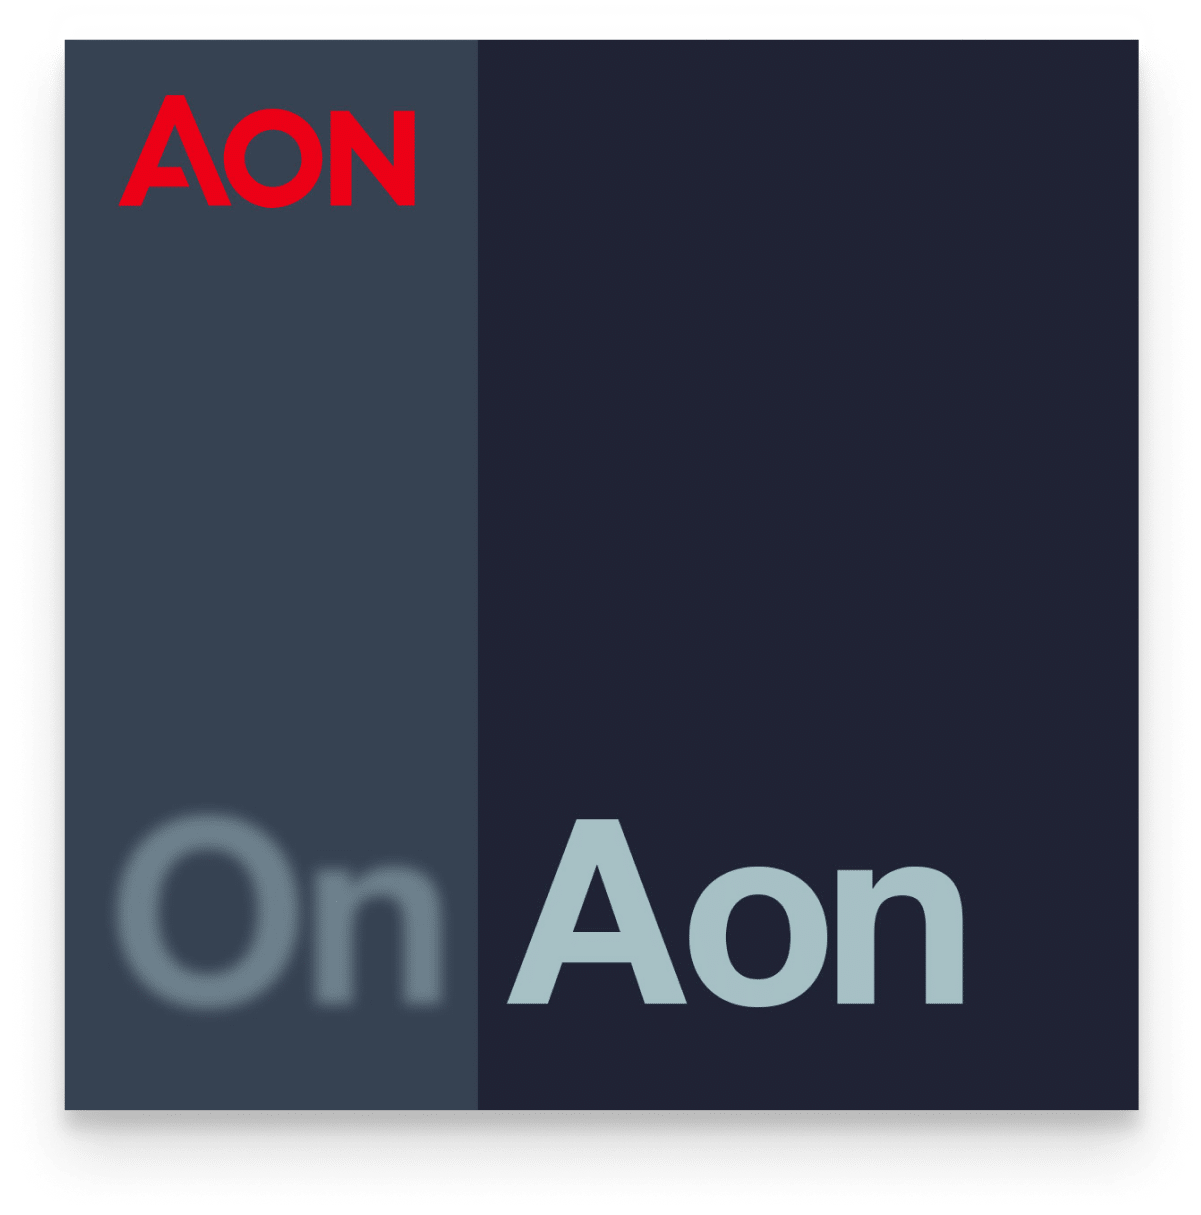 The logo for the Aon podcast "On Aon".